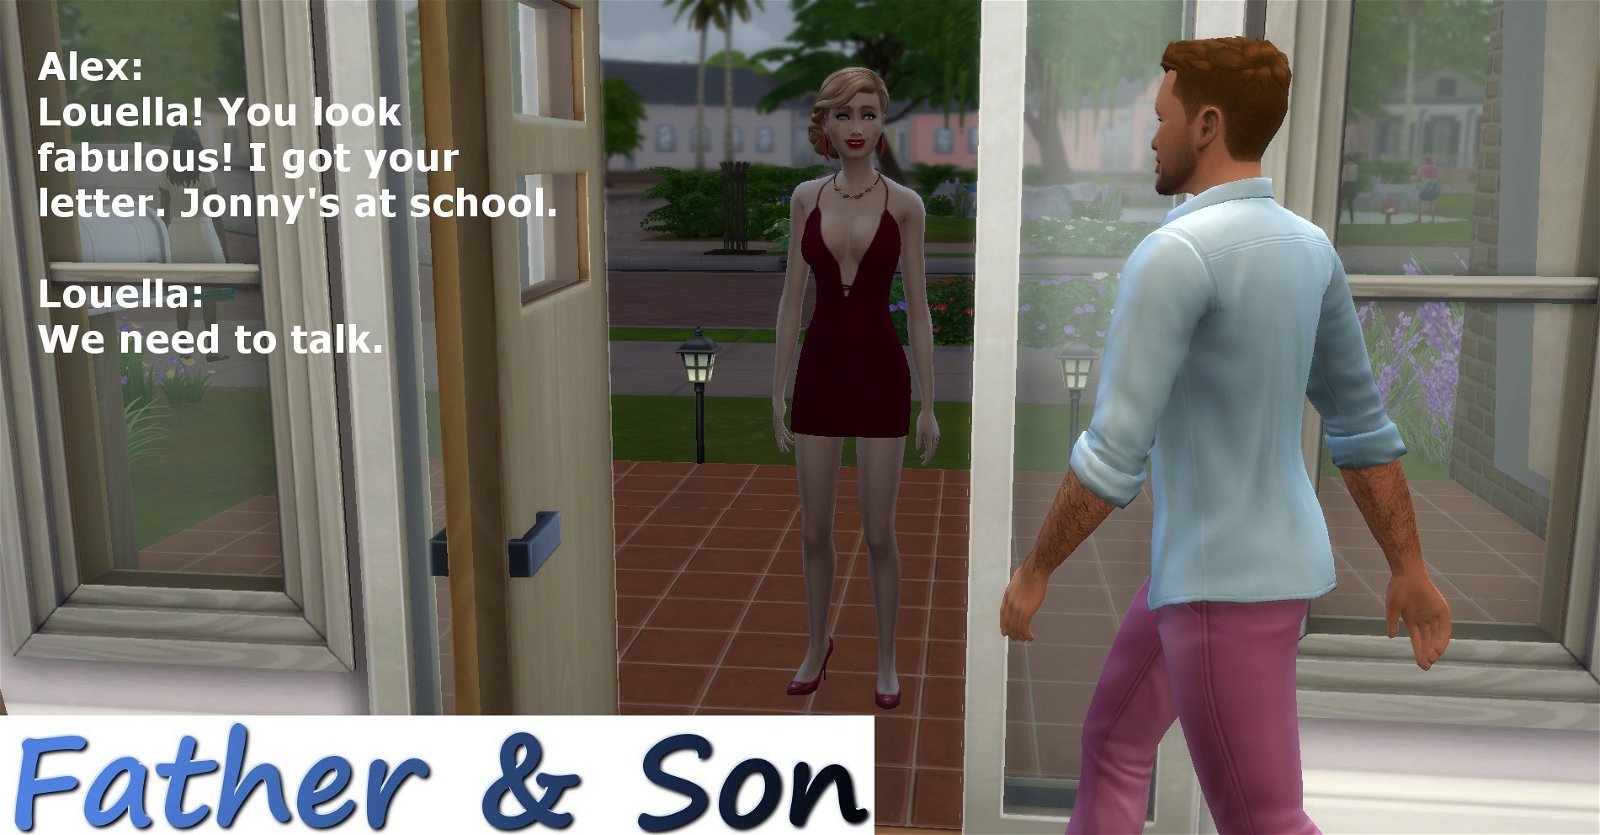 Photo by Sims4Men with the username @Sims4Men, who is a verified user,  December 31, 2018 at 11:49 AM. The post is about the topic Gay Incest and the text says 'Father & Son: Part 4'